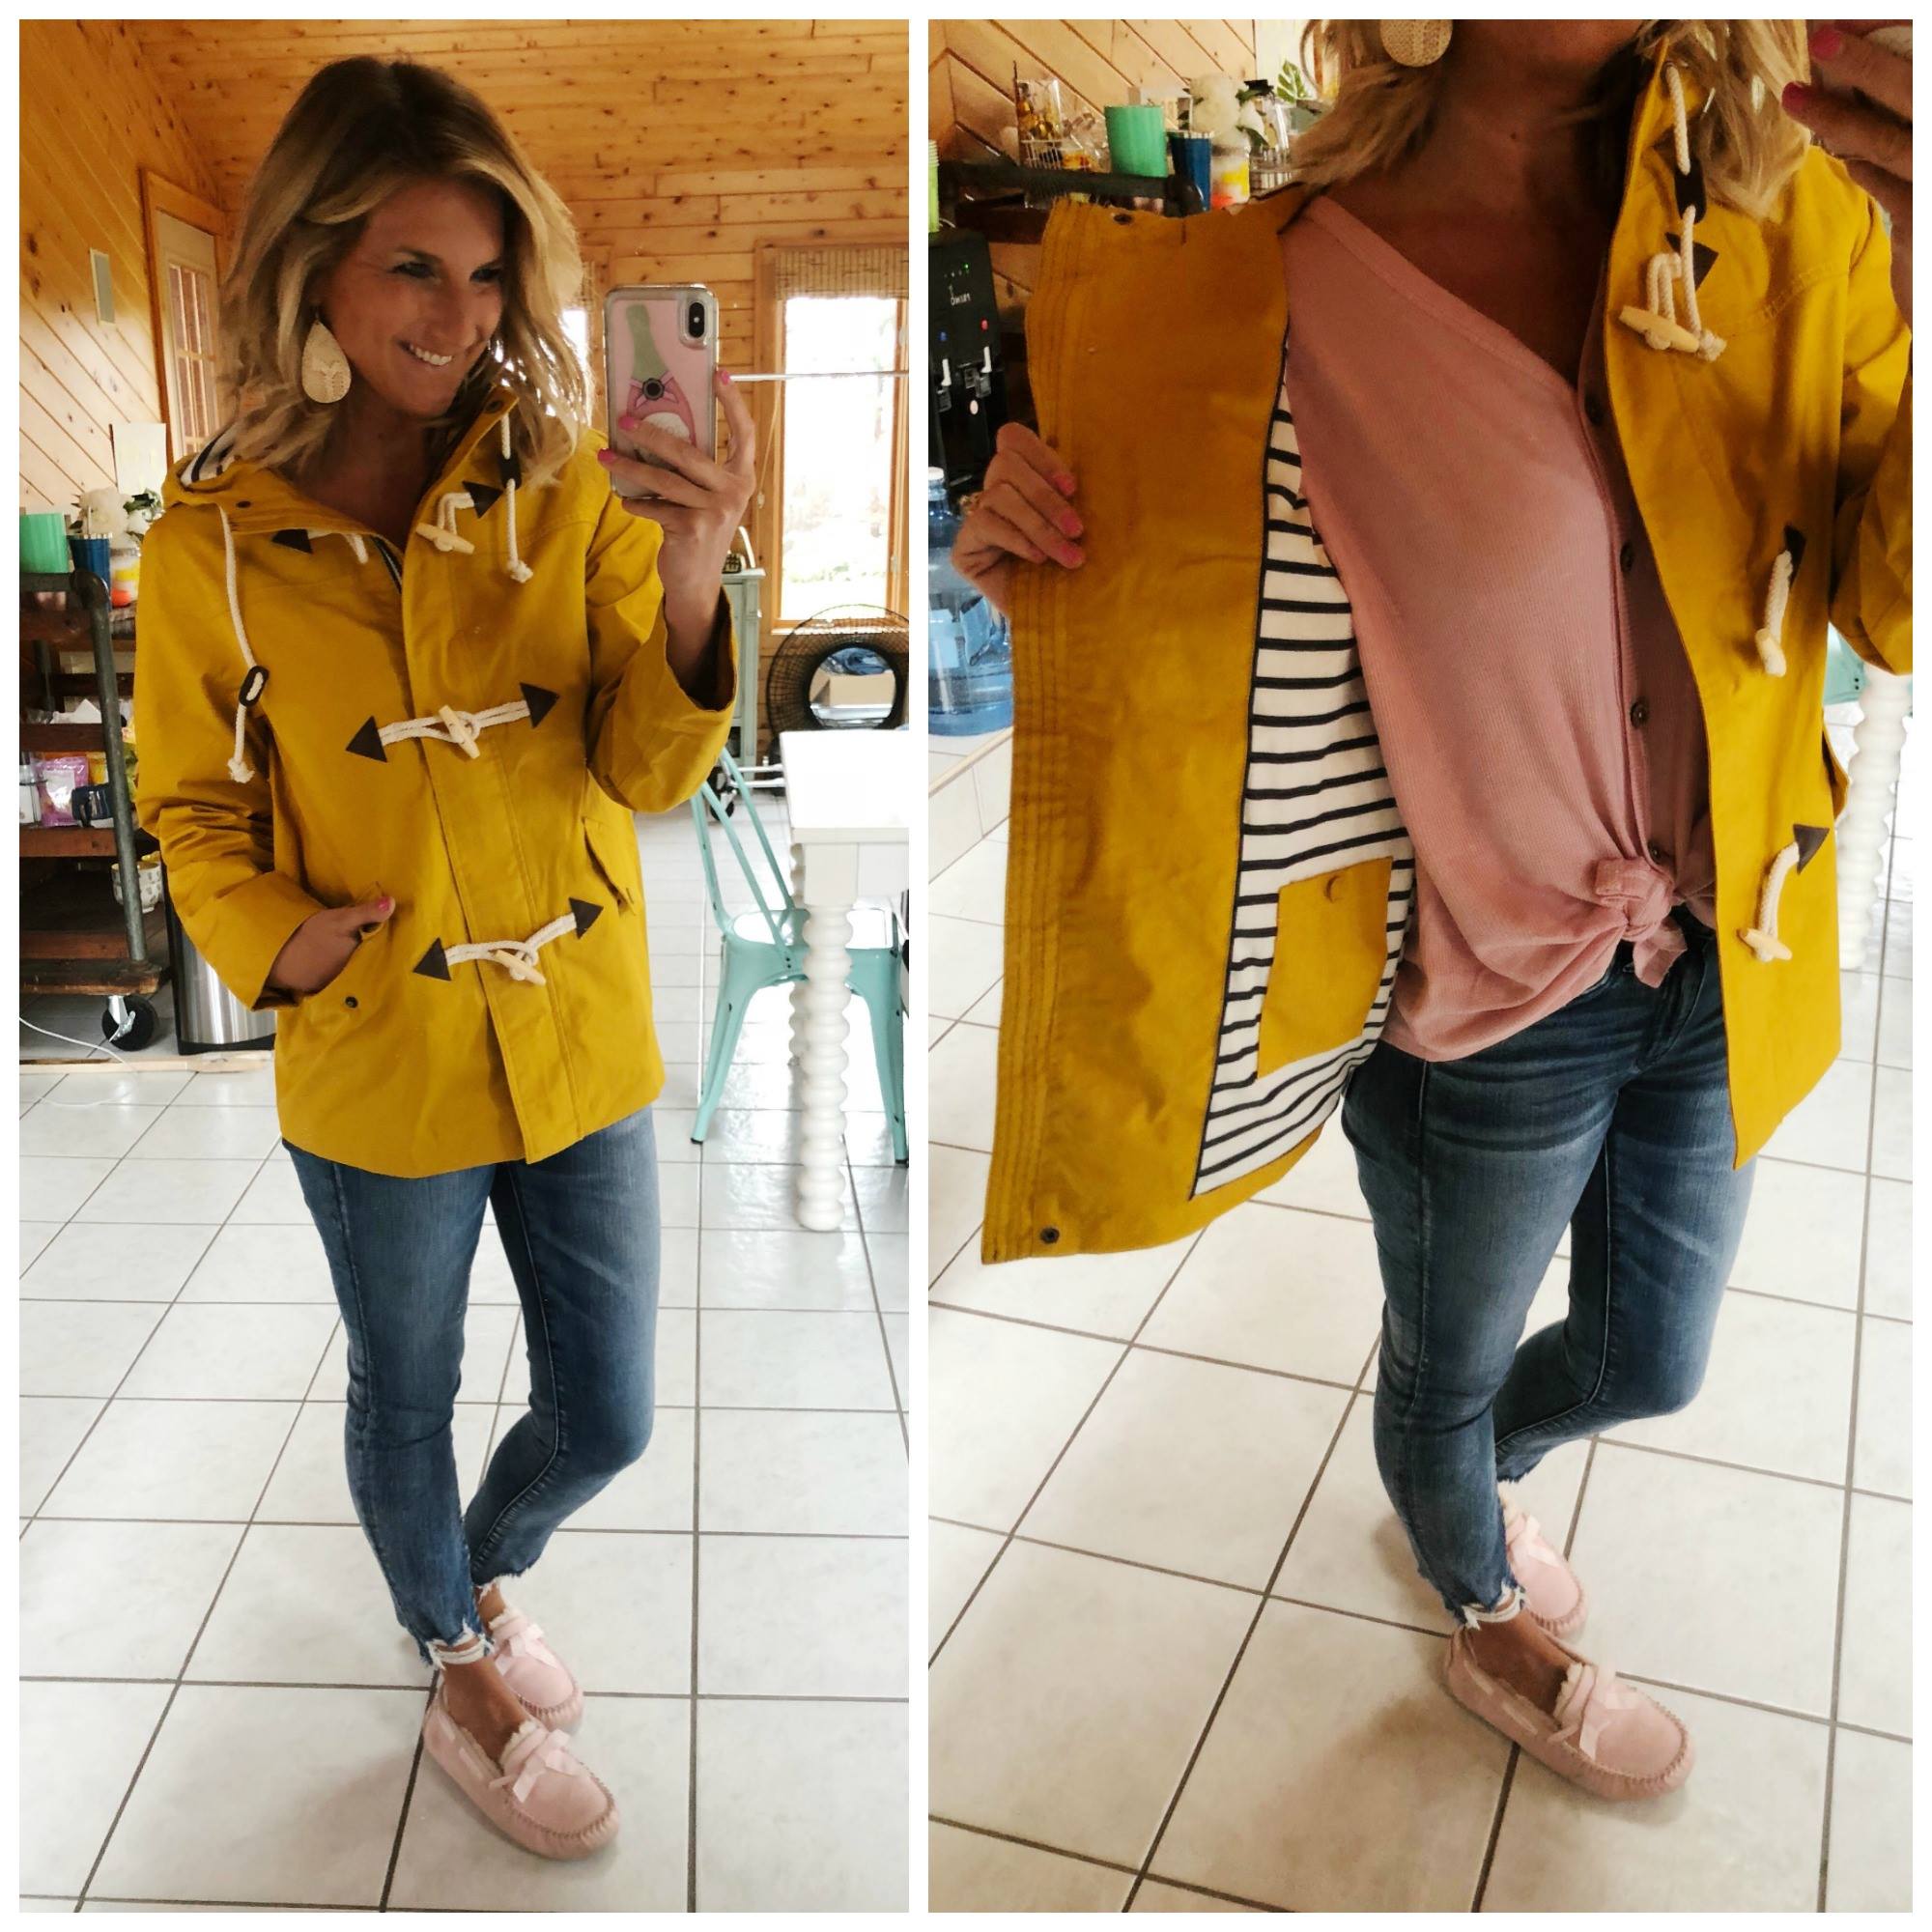 Spring Jacket // Perfect jacket for rainy days or cooler days // outfit of the day